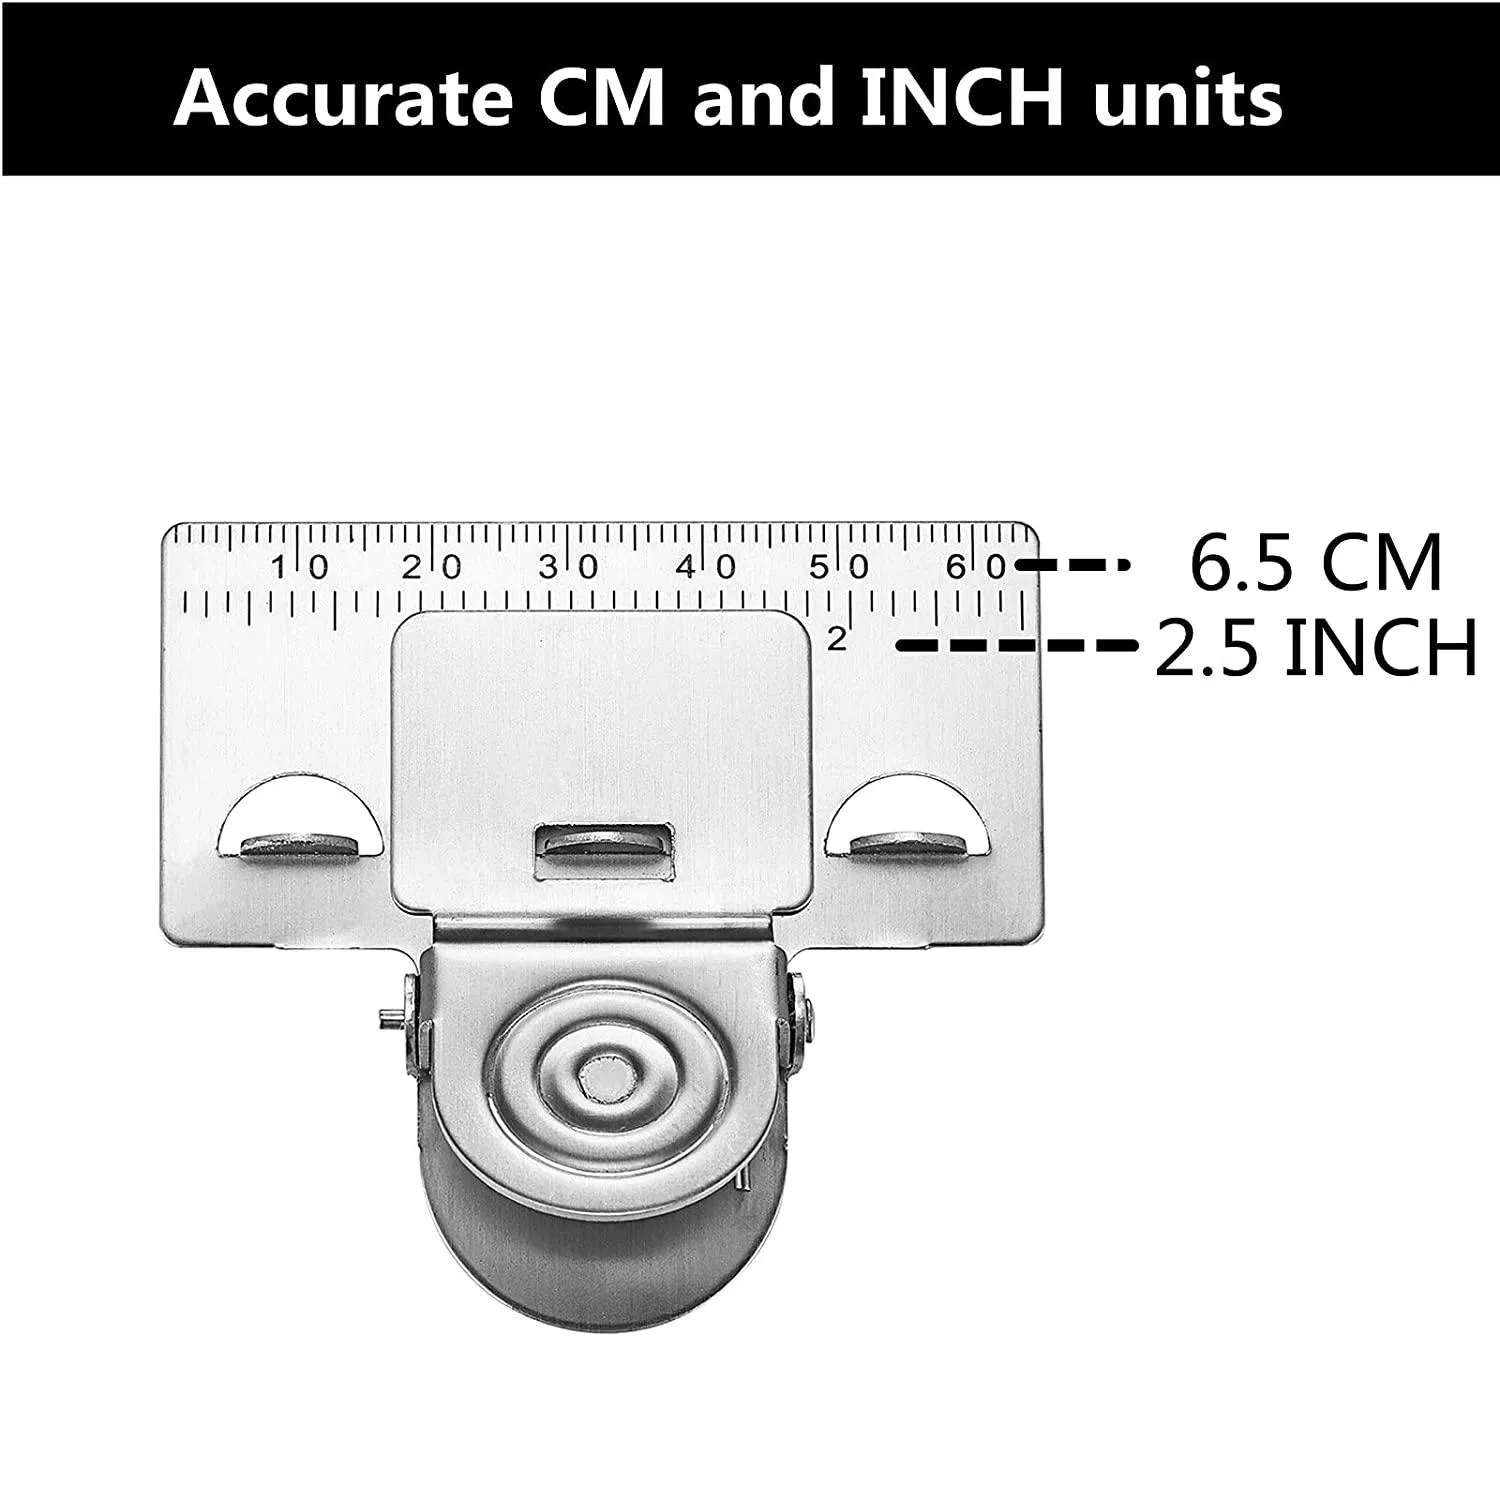 Measures Tools Measuring Tape Clip in Cm and INCHES Convenient Multifunctional Tapes Measure Locate Accurate Calibration Tool Decoration Any Spot Angle